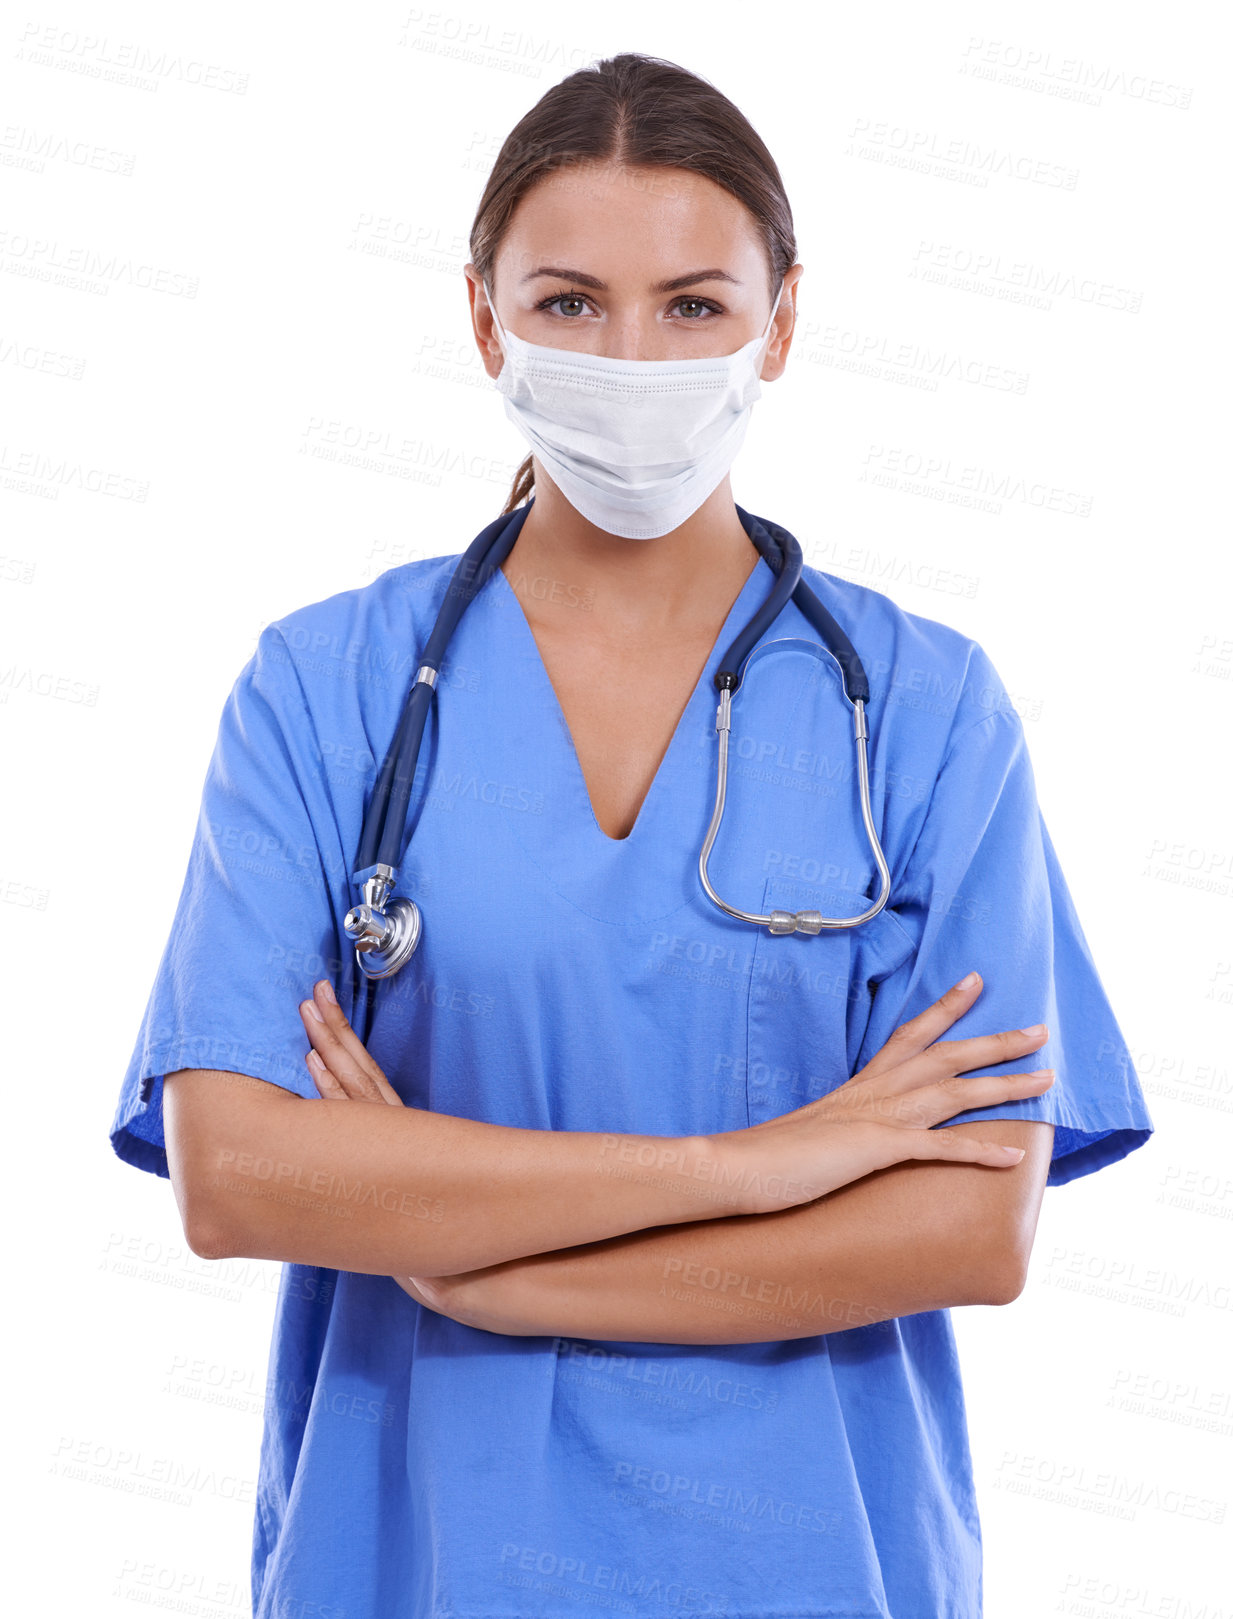 Buy stock photo A young surgeon wearing scrubs and a surgical mask looking at the camera